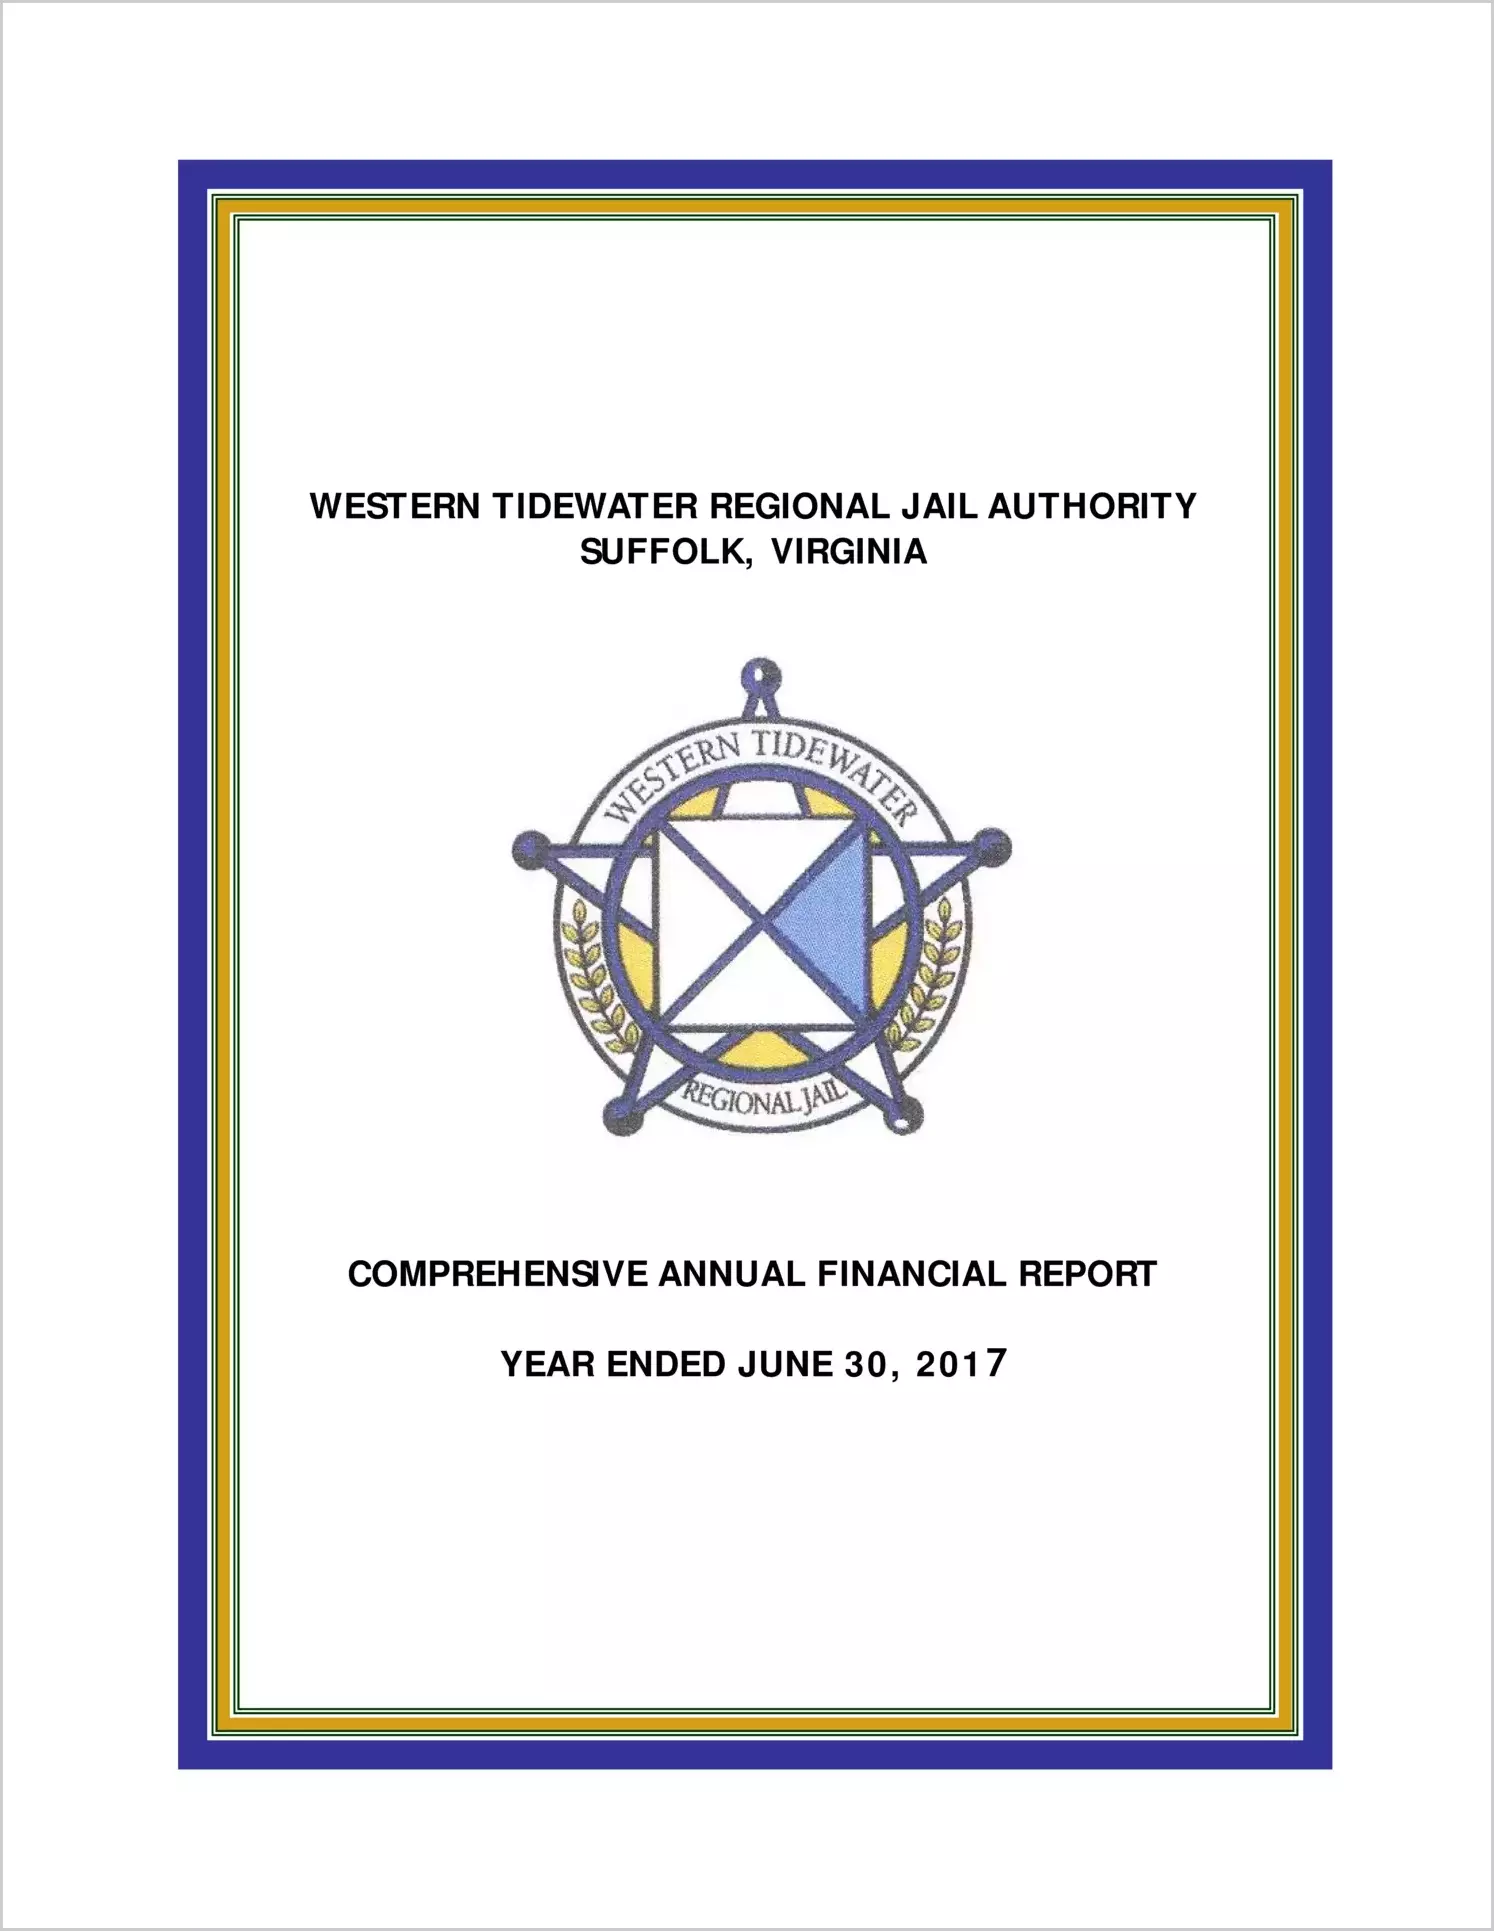 2017 ABC/Other Annual Financial Report  for Western Tidewater Regional Jail Authority